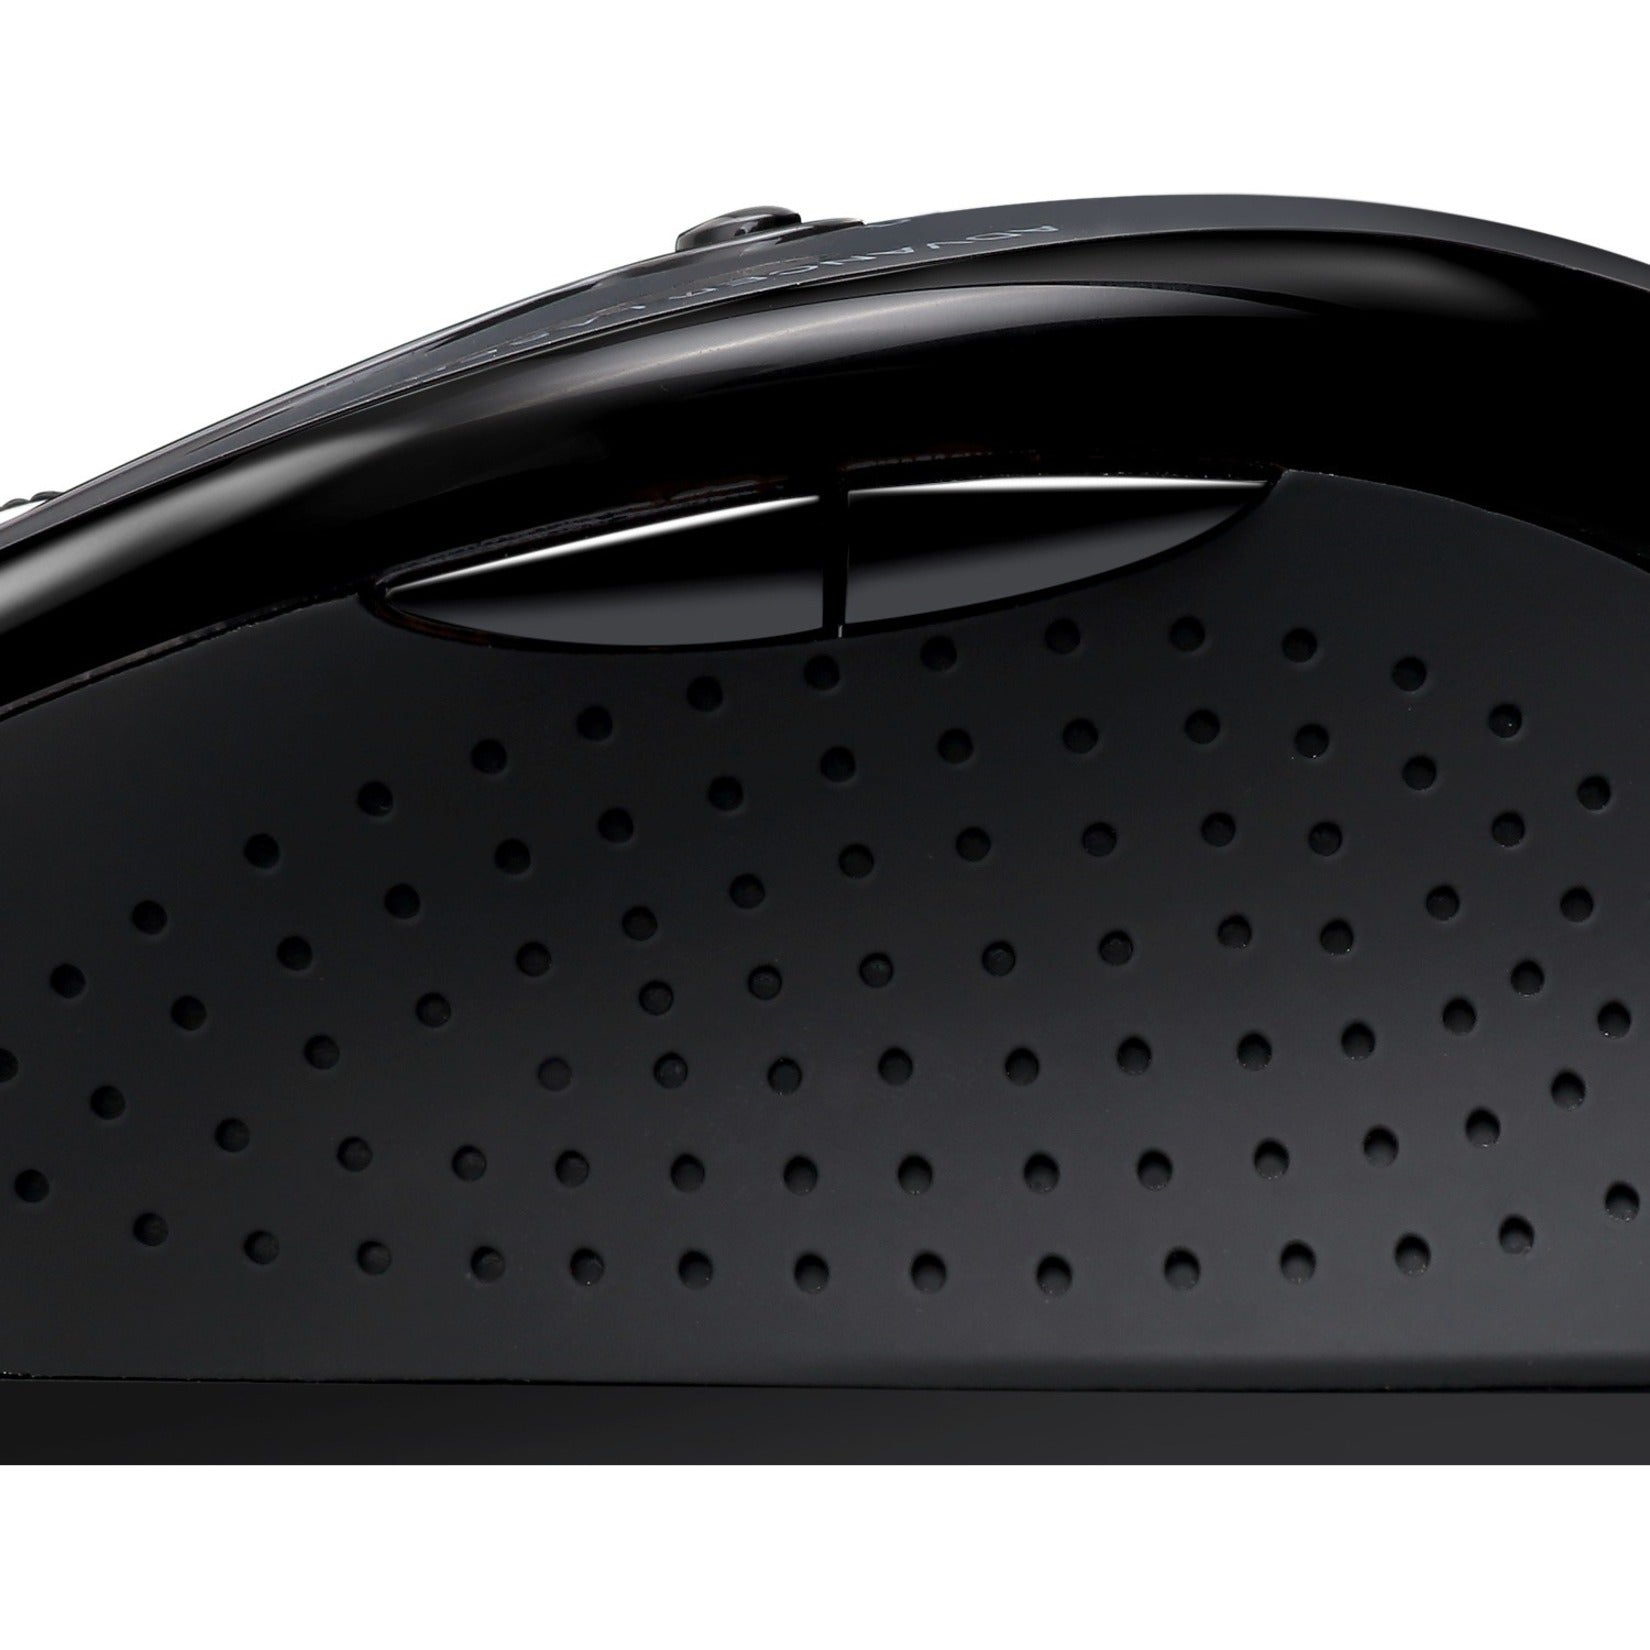 Adesso IMOUSE G2 Ergonomic Optical Mouse, 2400 DPI, 6 Buttons, USB Wired, Right-Handed Only